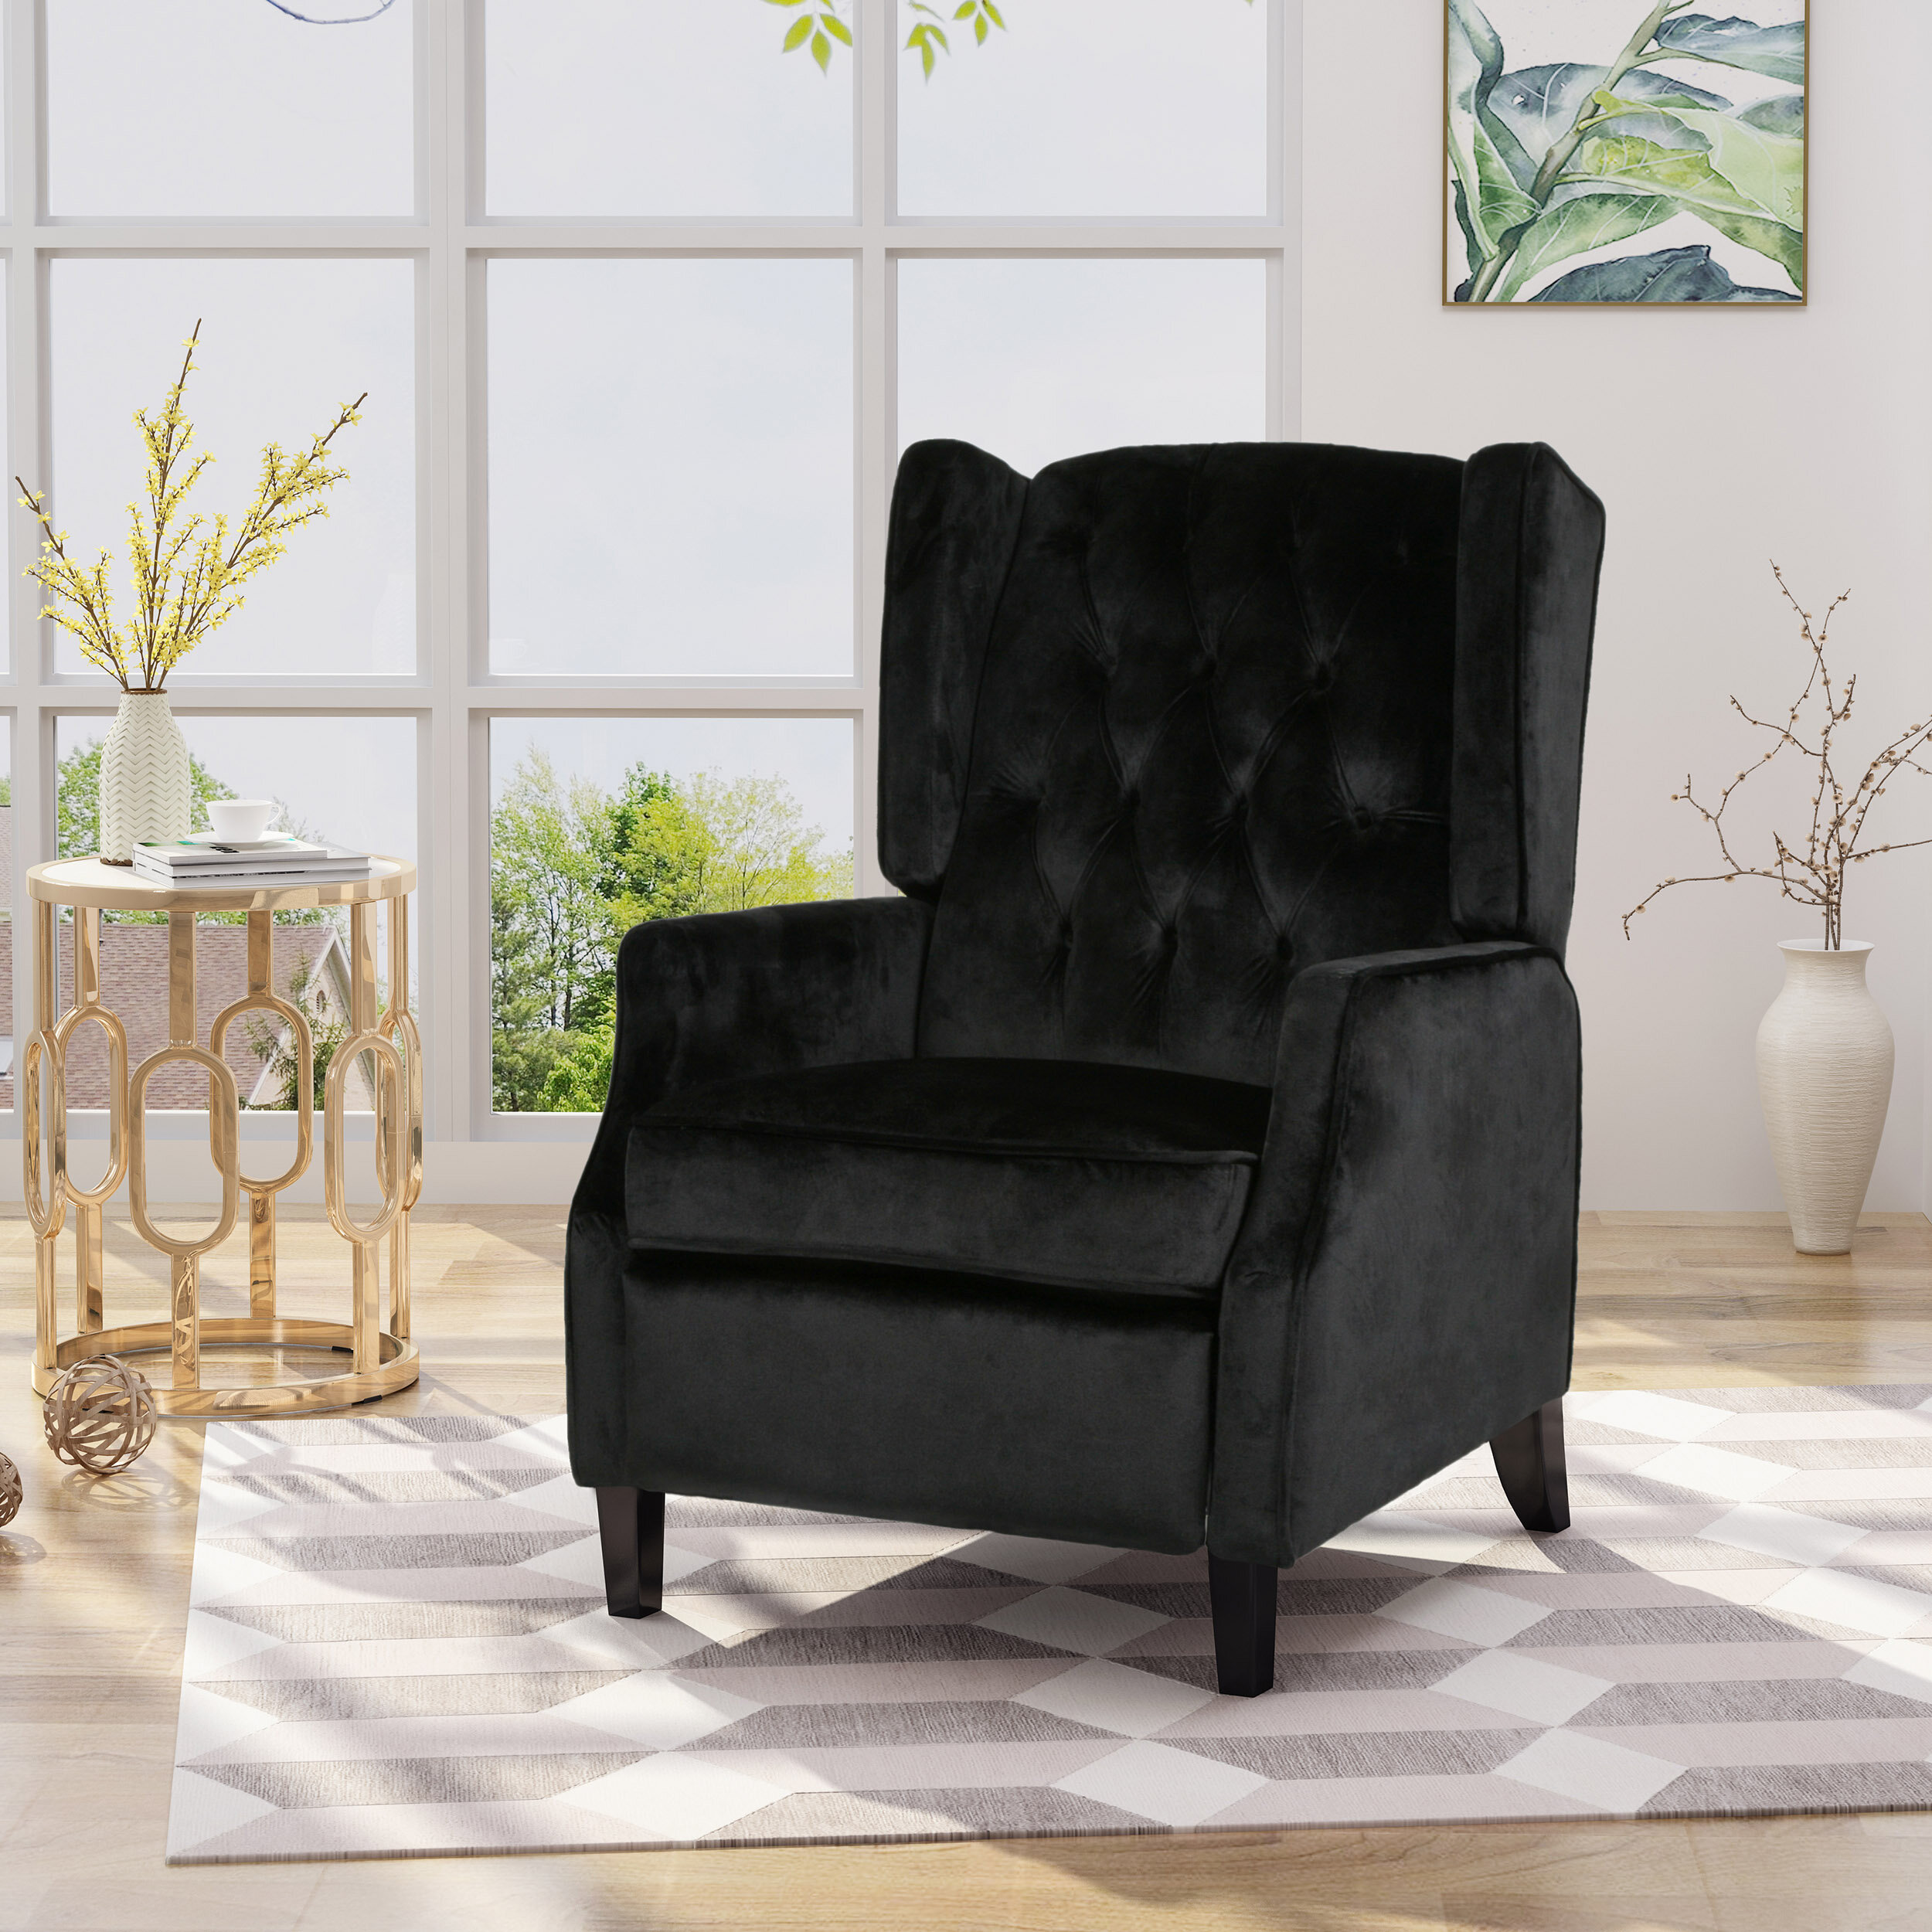 Morphis 26.75” Wide Manual Wing Chair Recliner